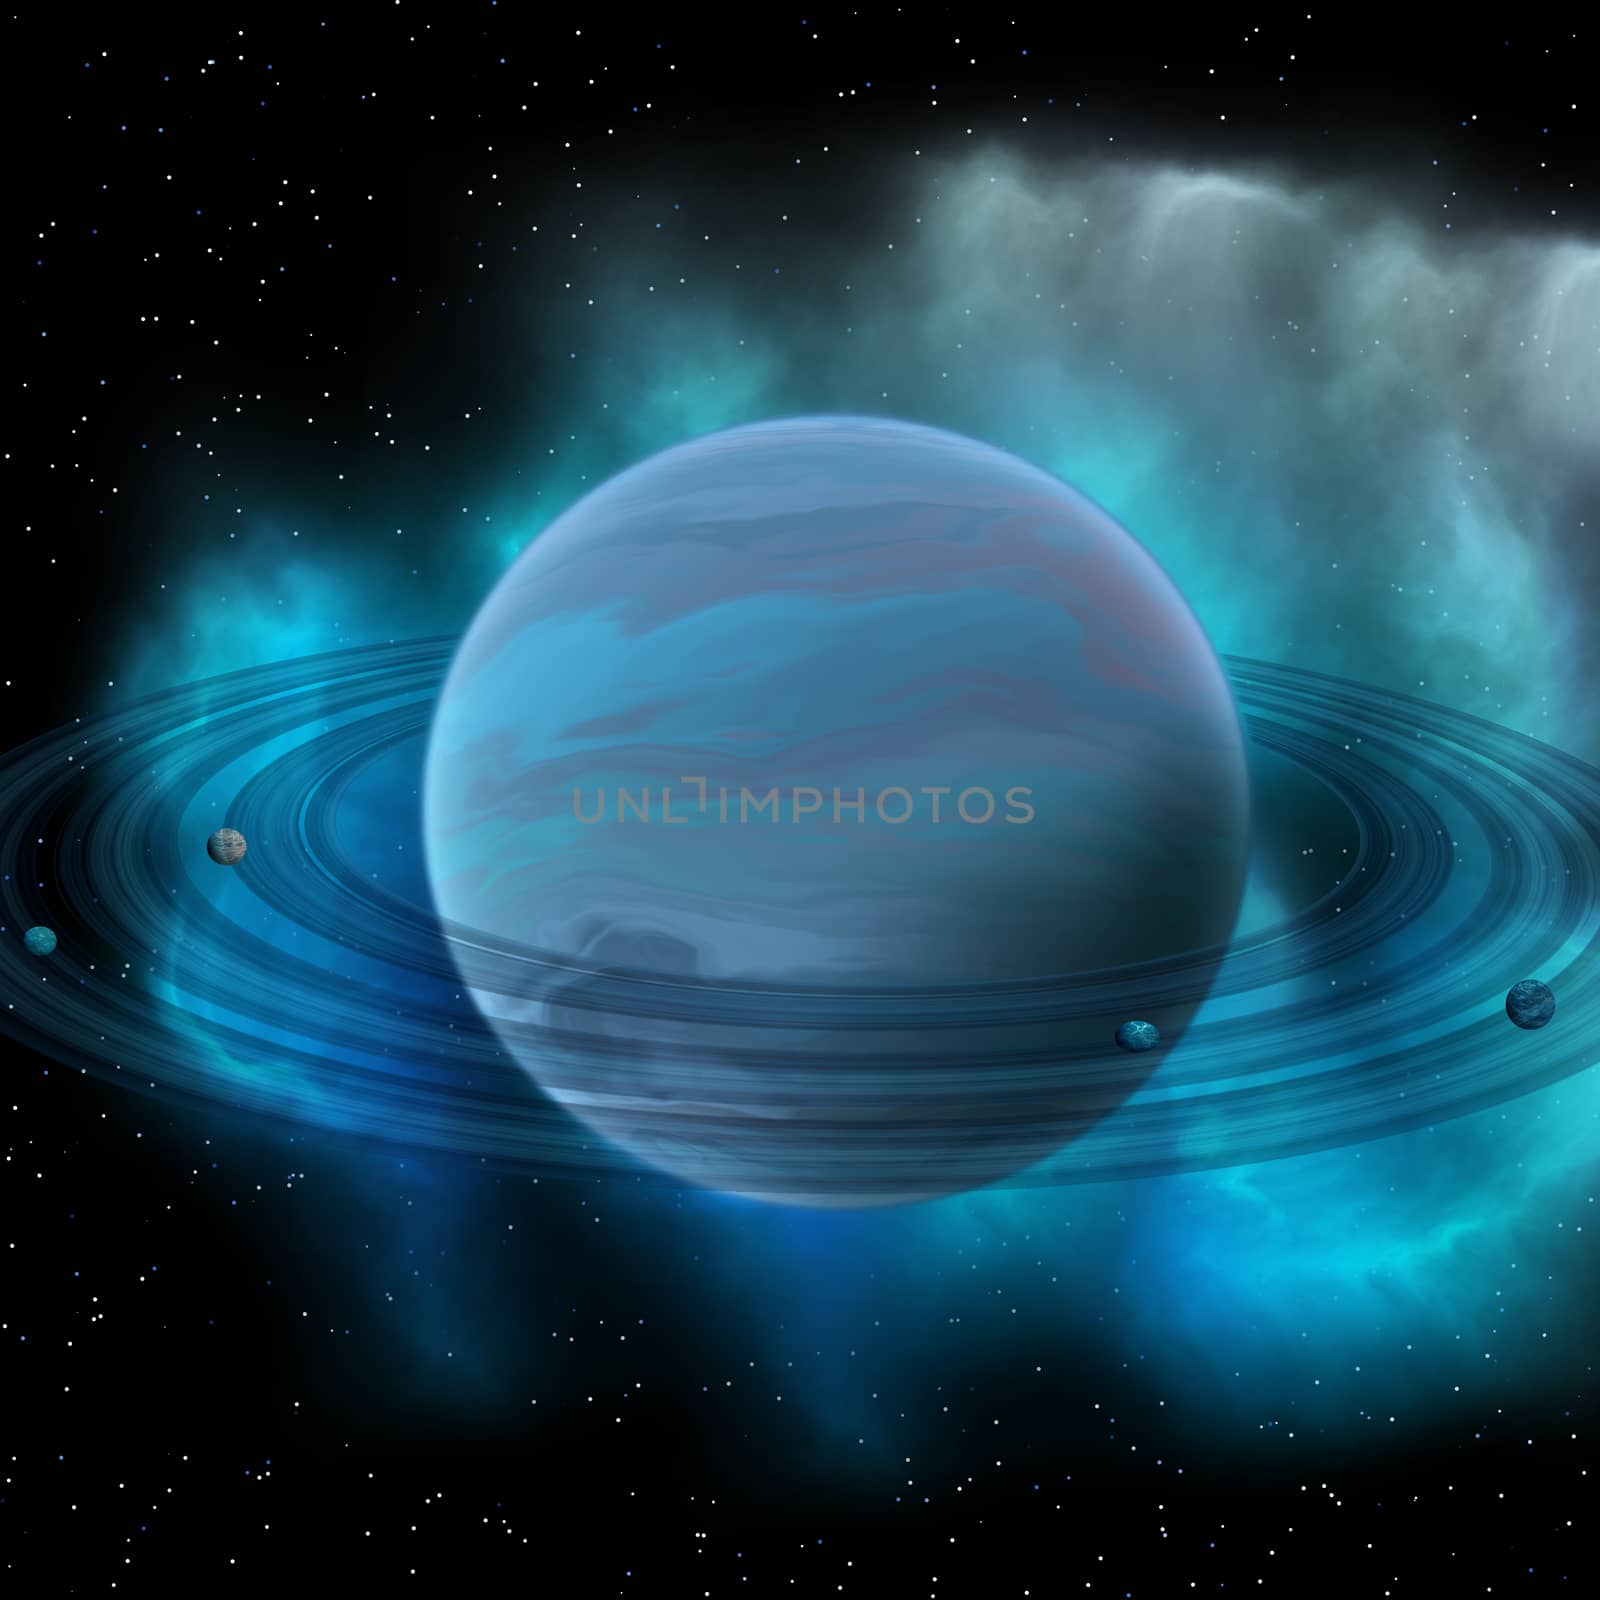 Neptune is the eight planet in our solar system and has planetary rings and a great dark spot indicating a storm on its surface.